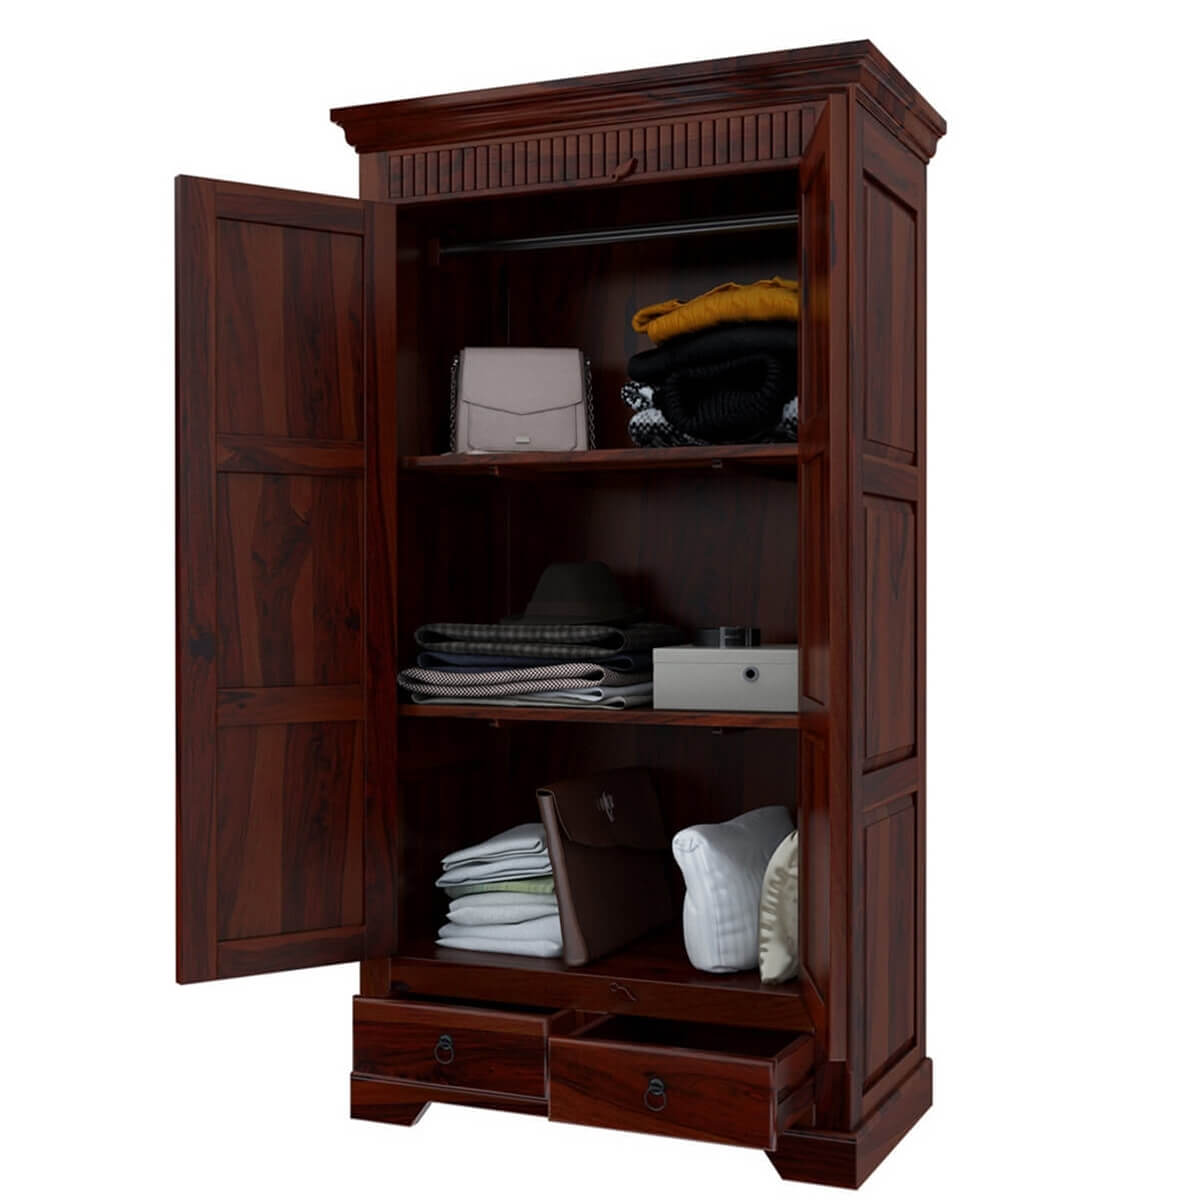 https://www.sierralivingconcepts.com/images/thumbs/0390648_marengo-rustic-solid-wood-large-clothing-armoire-wardrobe-with-drawers.jpeg